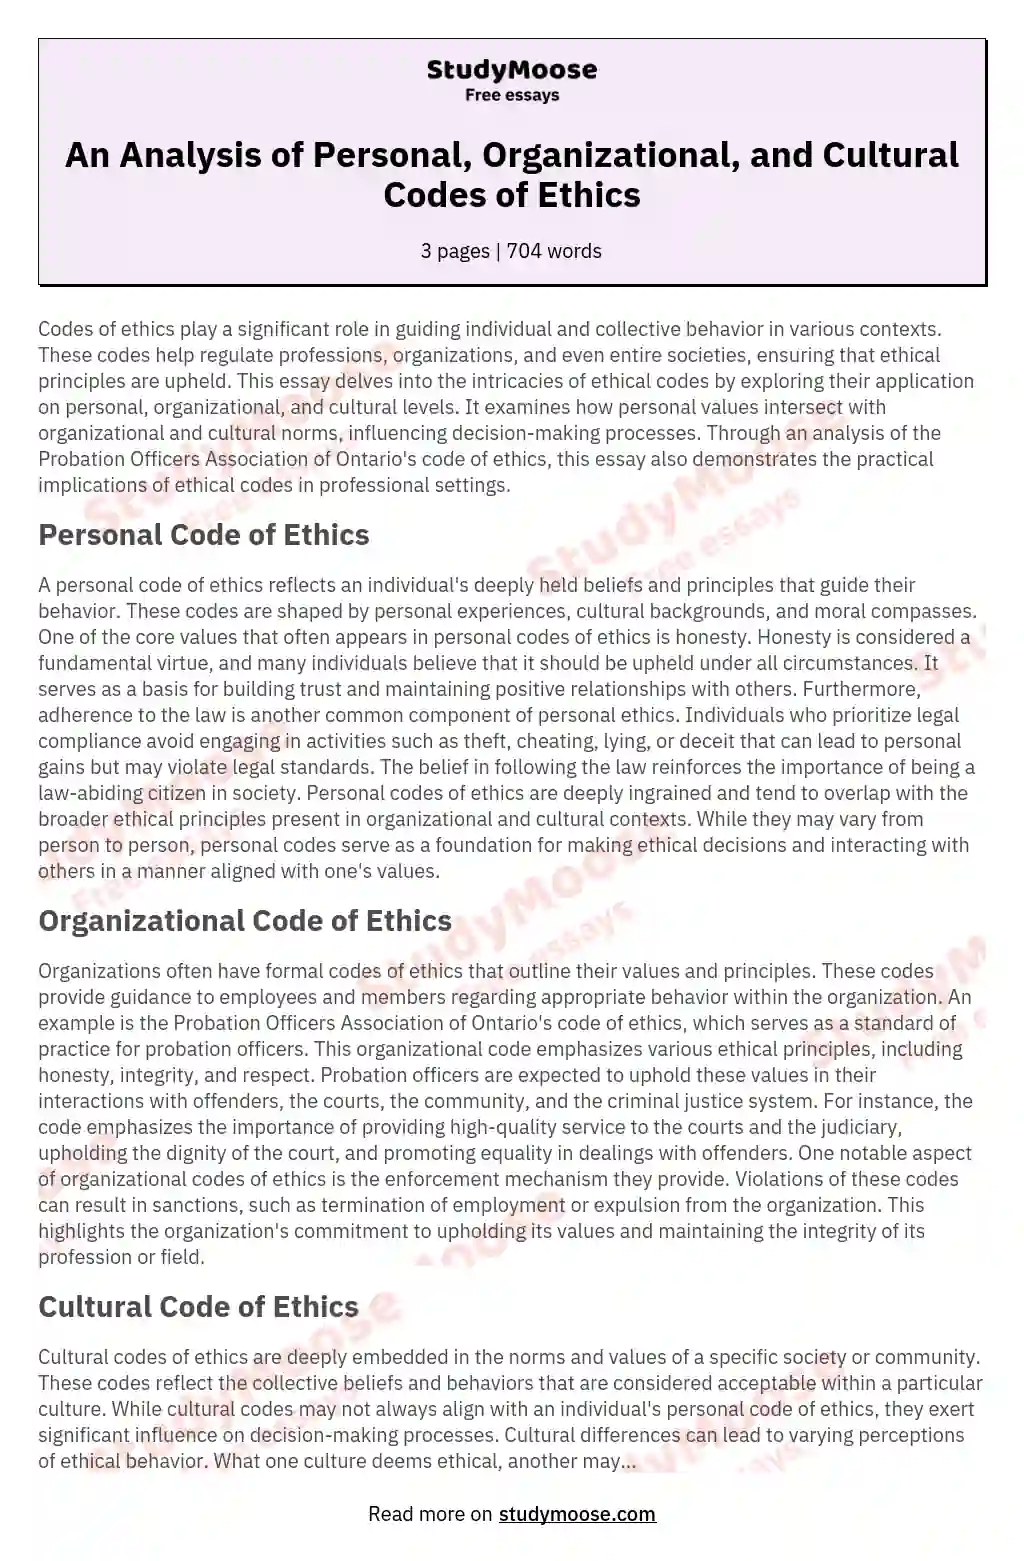 An Analysis of Personal, Organizational, and Cultural Codes of Ethics essay